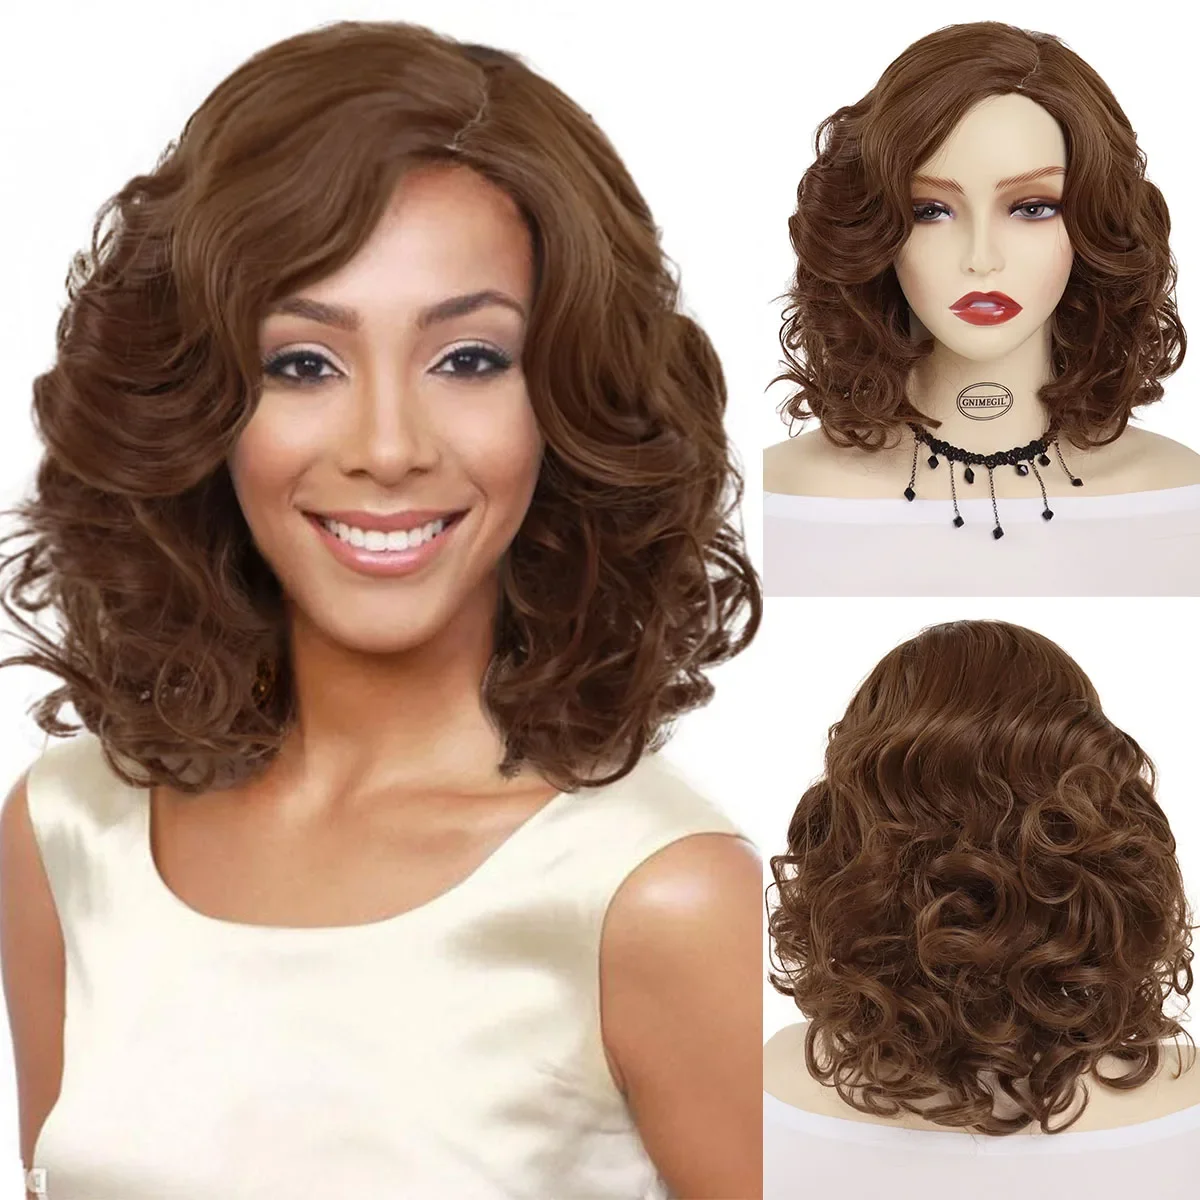 

GNIMEGIL Synthetic Medium Brown Curly Wig Side Parting Hair Natural Fluffy Wig for Black Women Ladies Party Halloween Cosplay